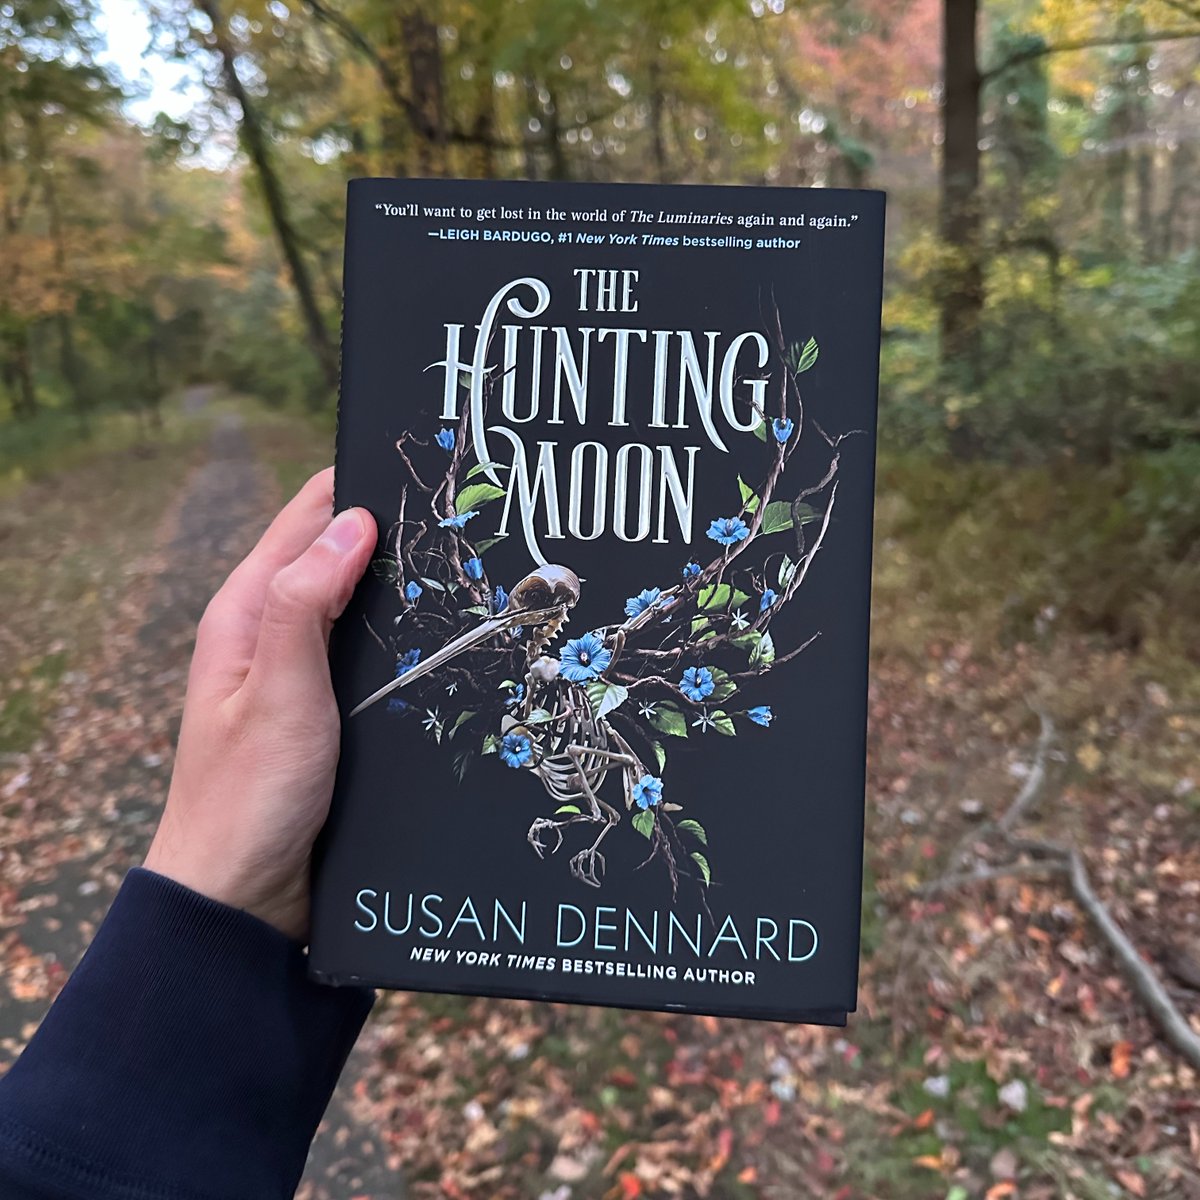 Winnie Wednesday has gotten everything she thought she wanted...but none of it feels right. In this highly anticipated sequel to The Luminaries by @stdennard, Winnie will question what it means to be a Wednesday and a true Luminary - and where her loyalties lie.🌙